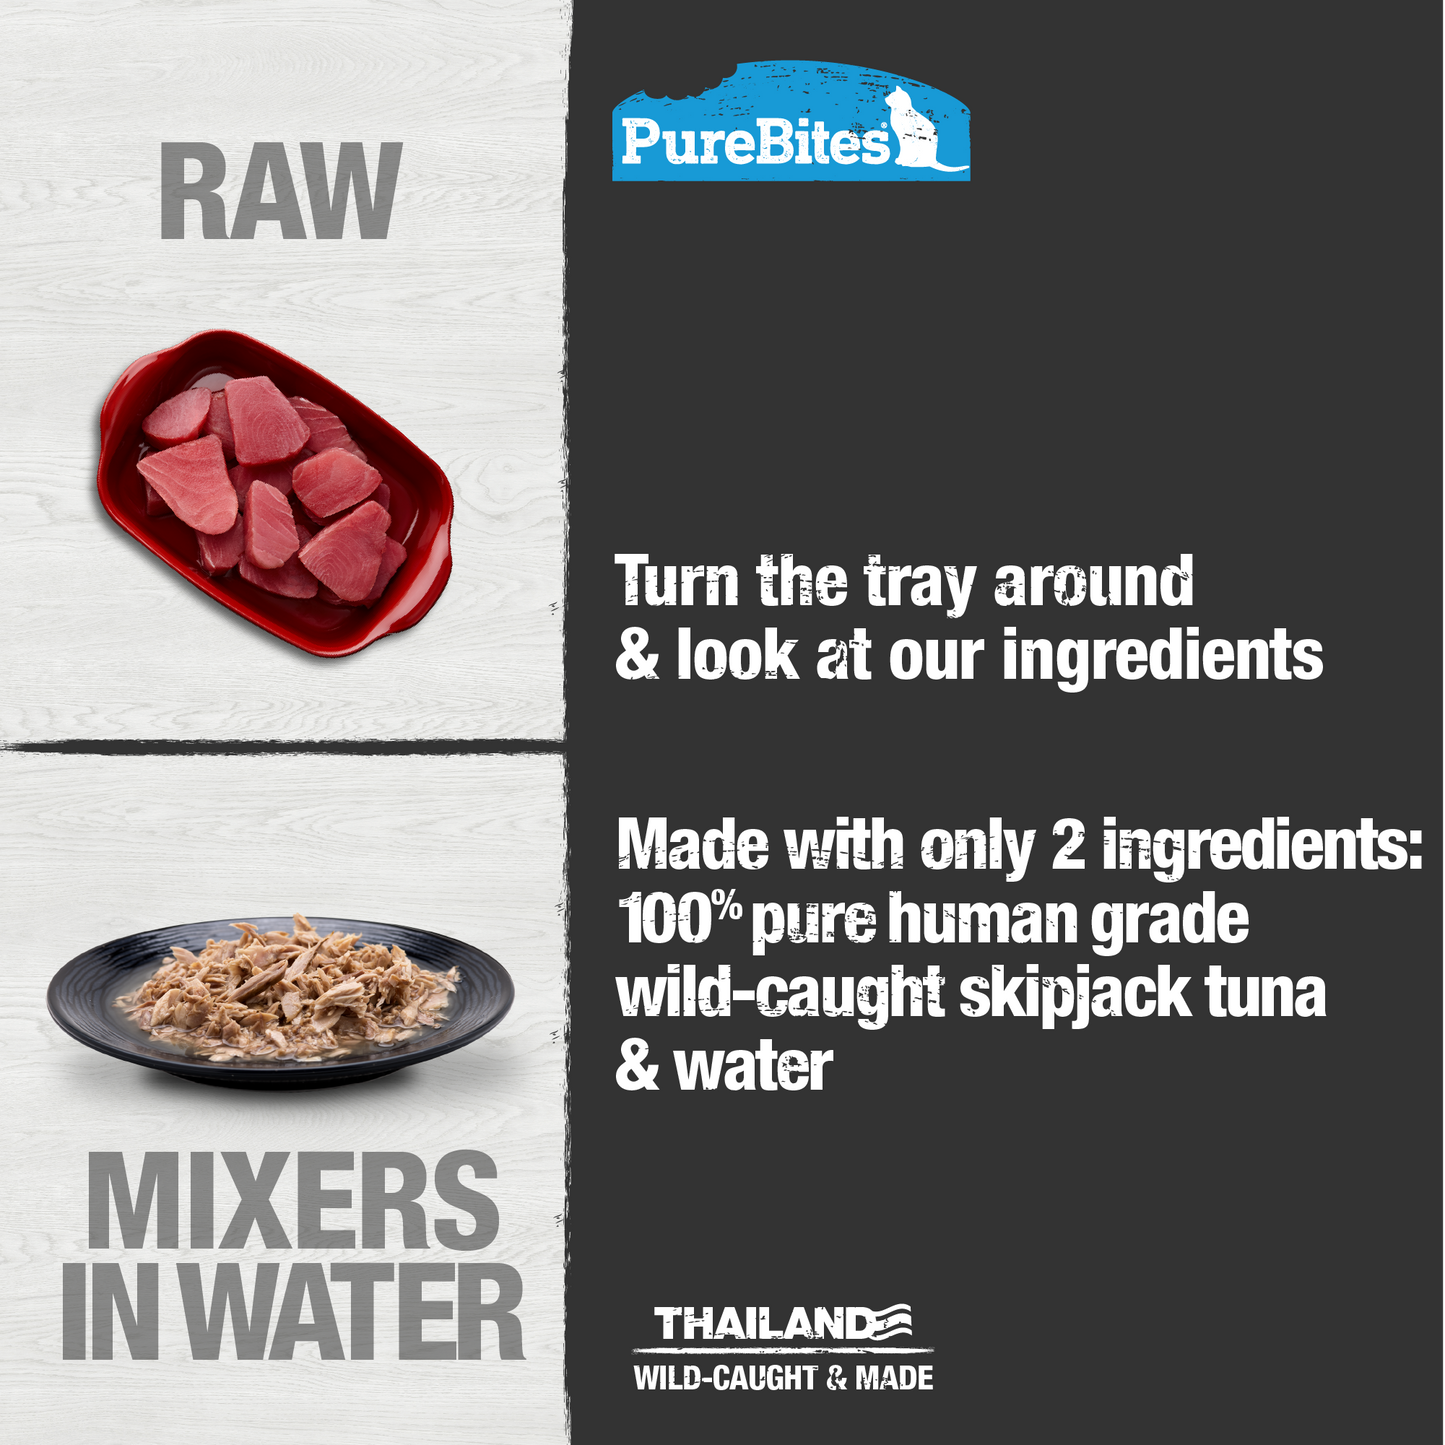 Made with only 2 Ingredients you can read, pronounce, and trust: Wild-caught Skipjack tuna, water.